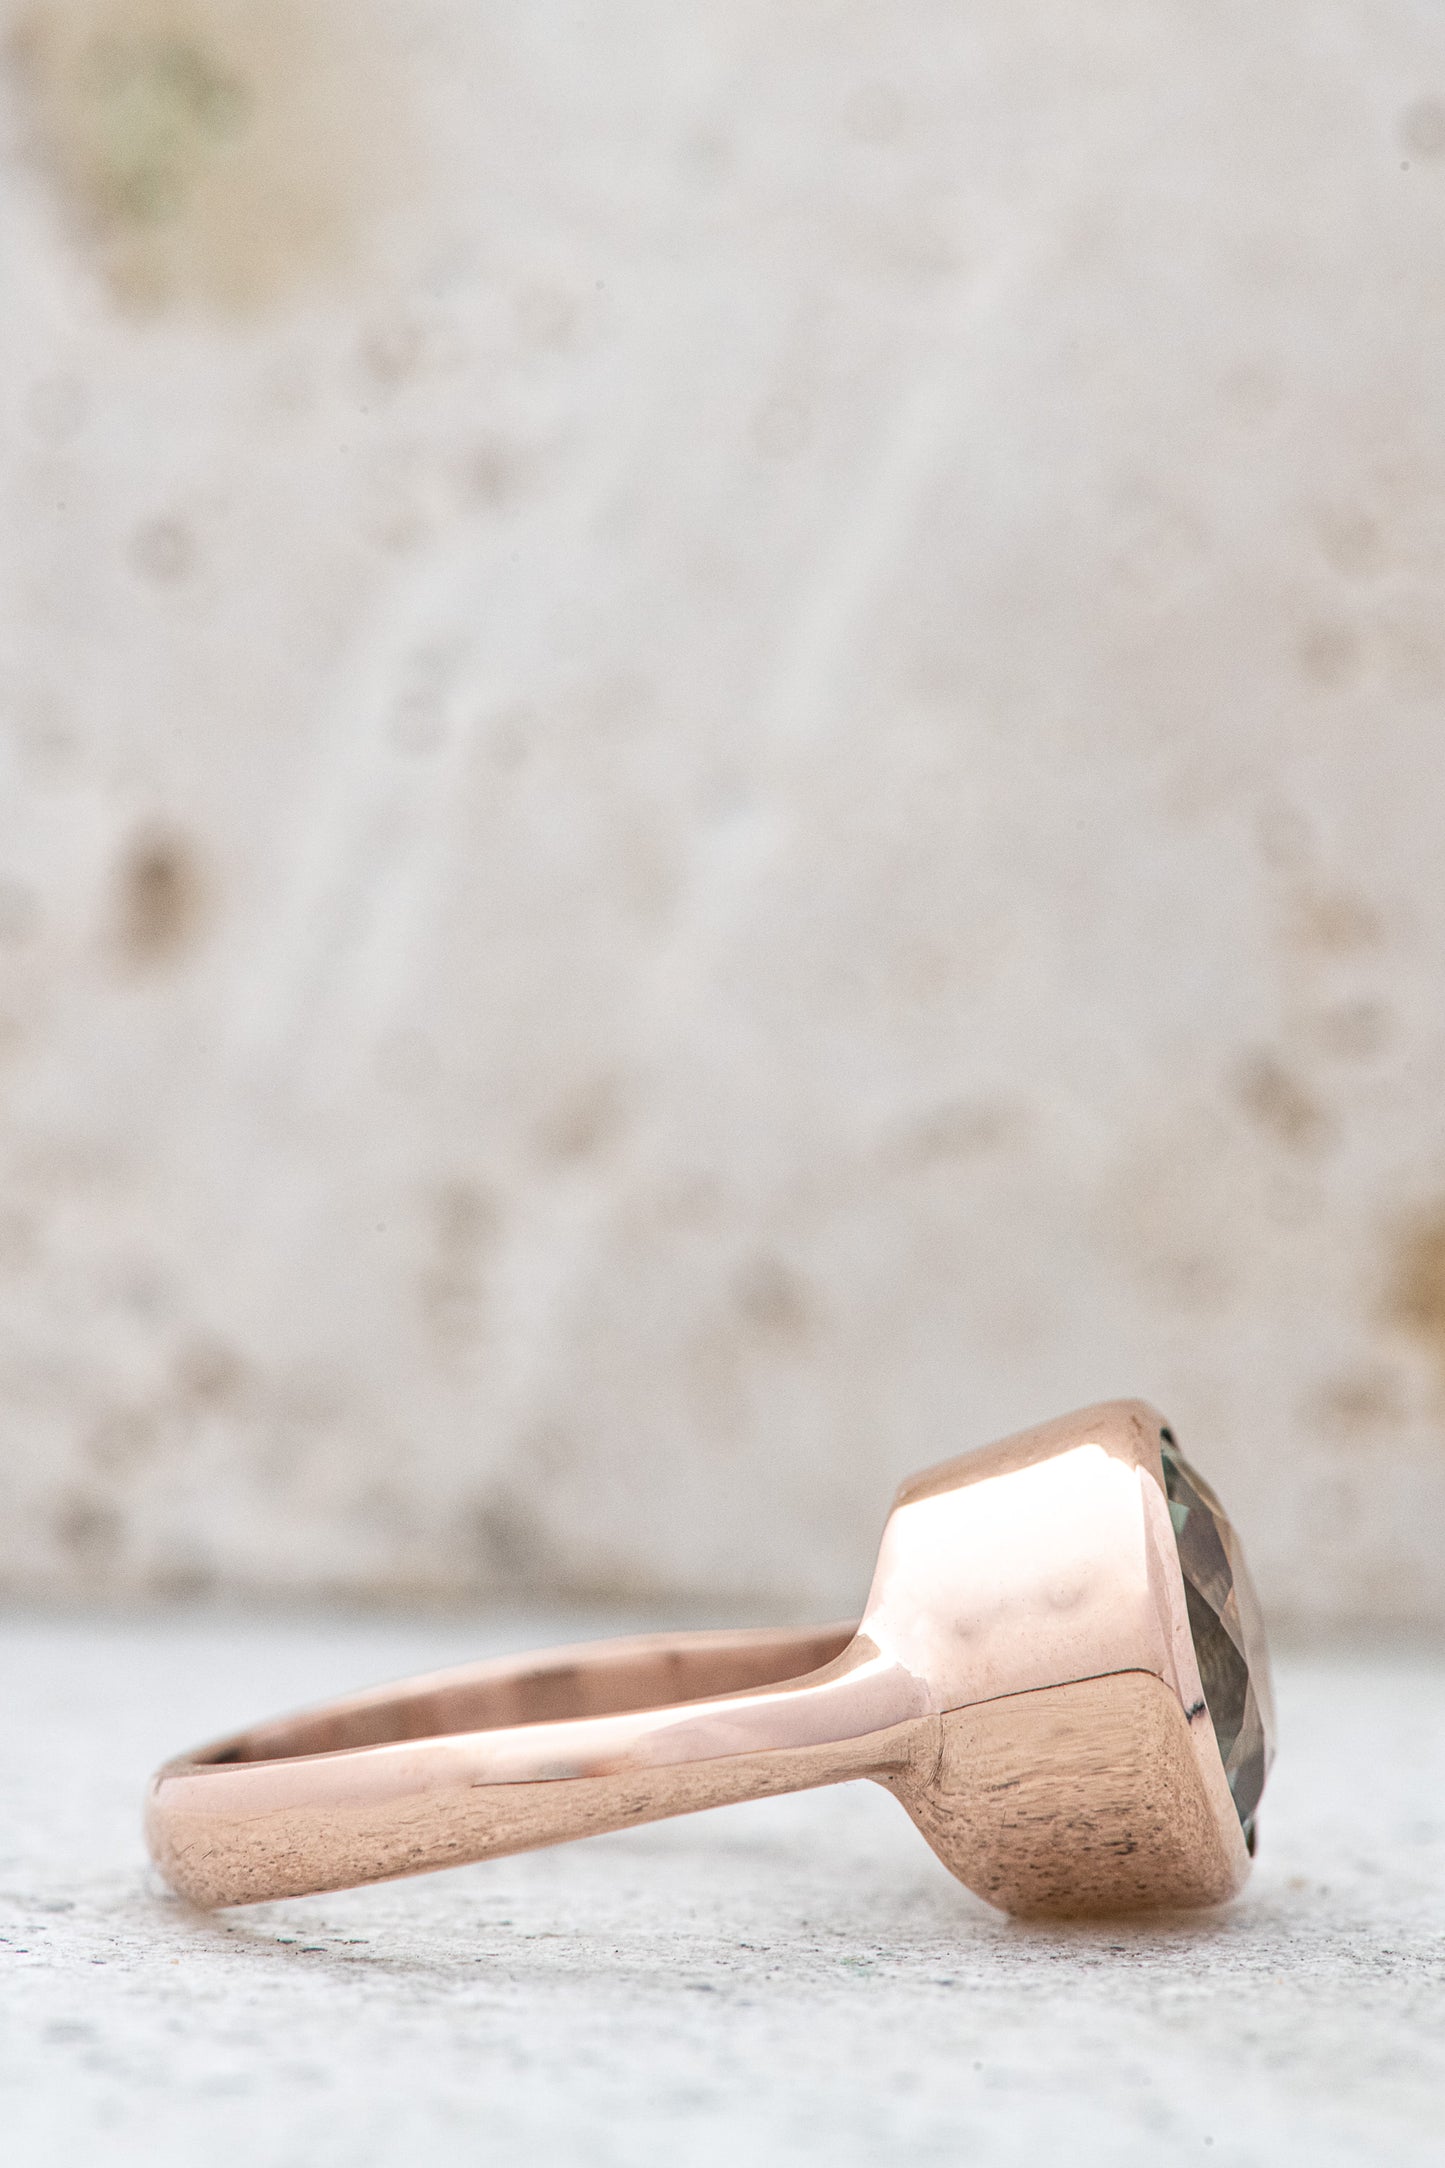 Handmade green amethyst and rose gold ring featuring a morganite stone.